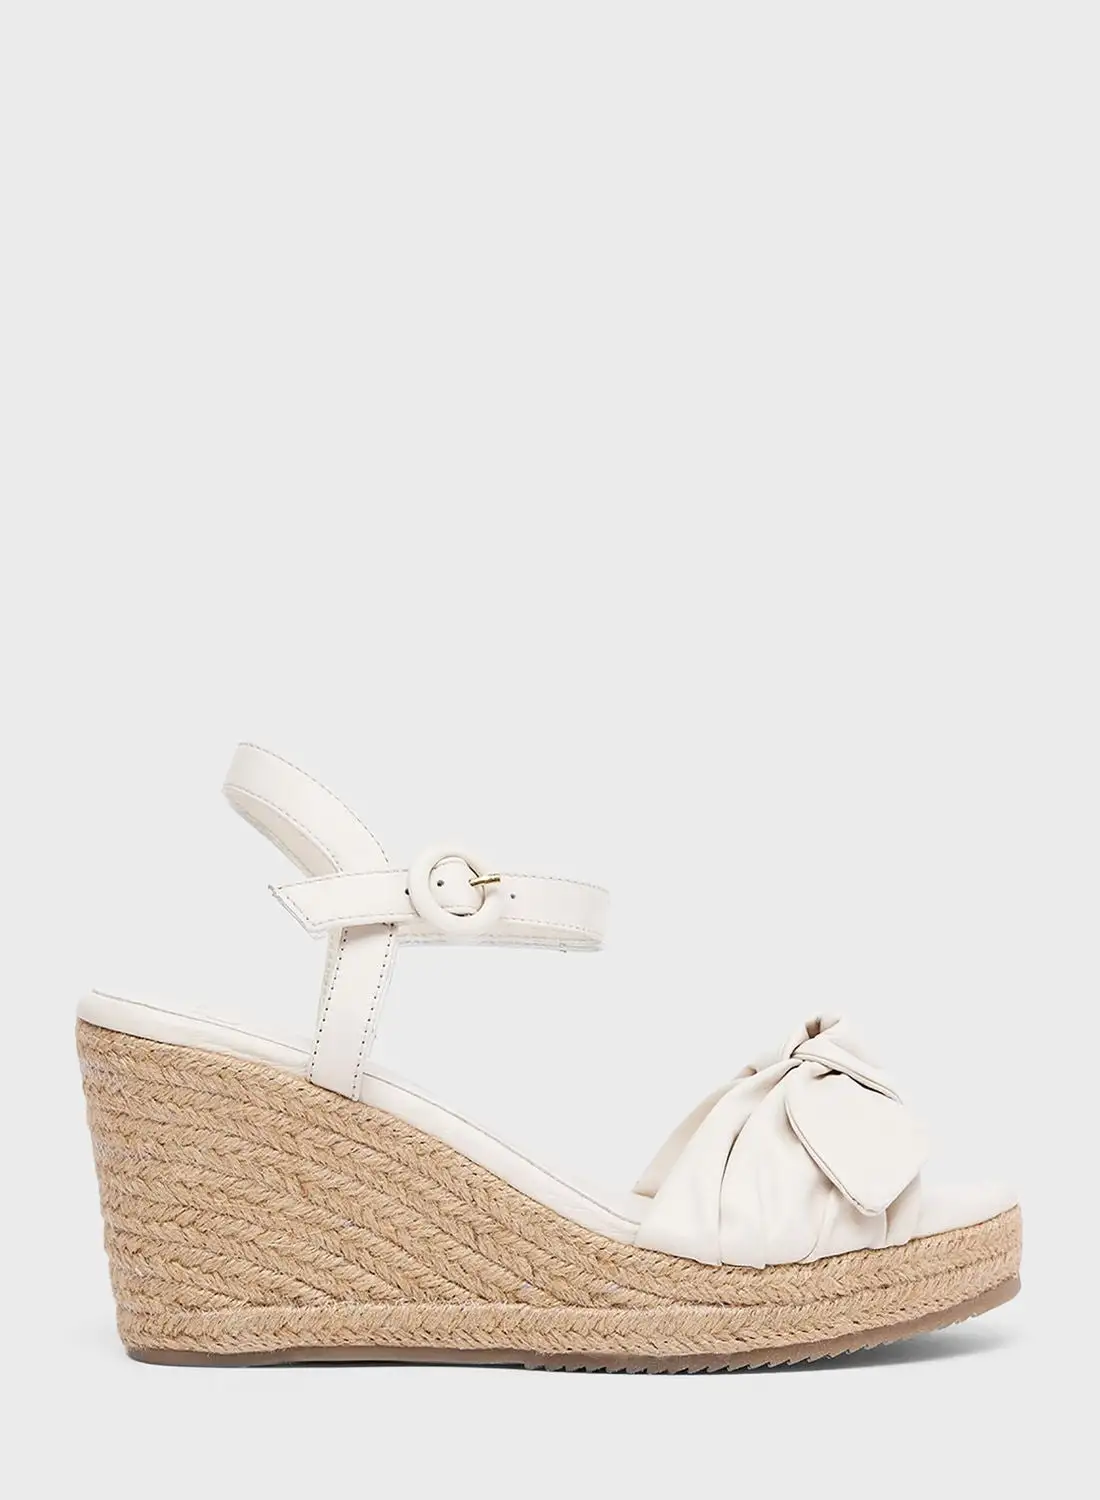 Ted Baker Leather Bow Wedge Sandal